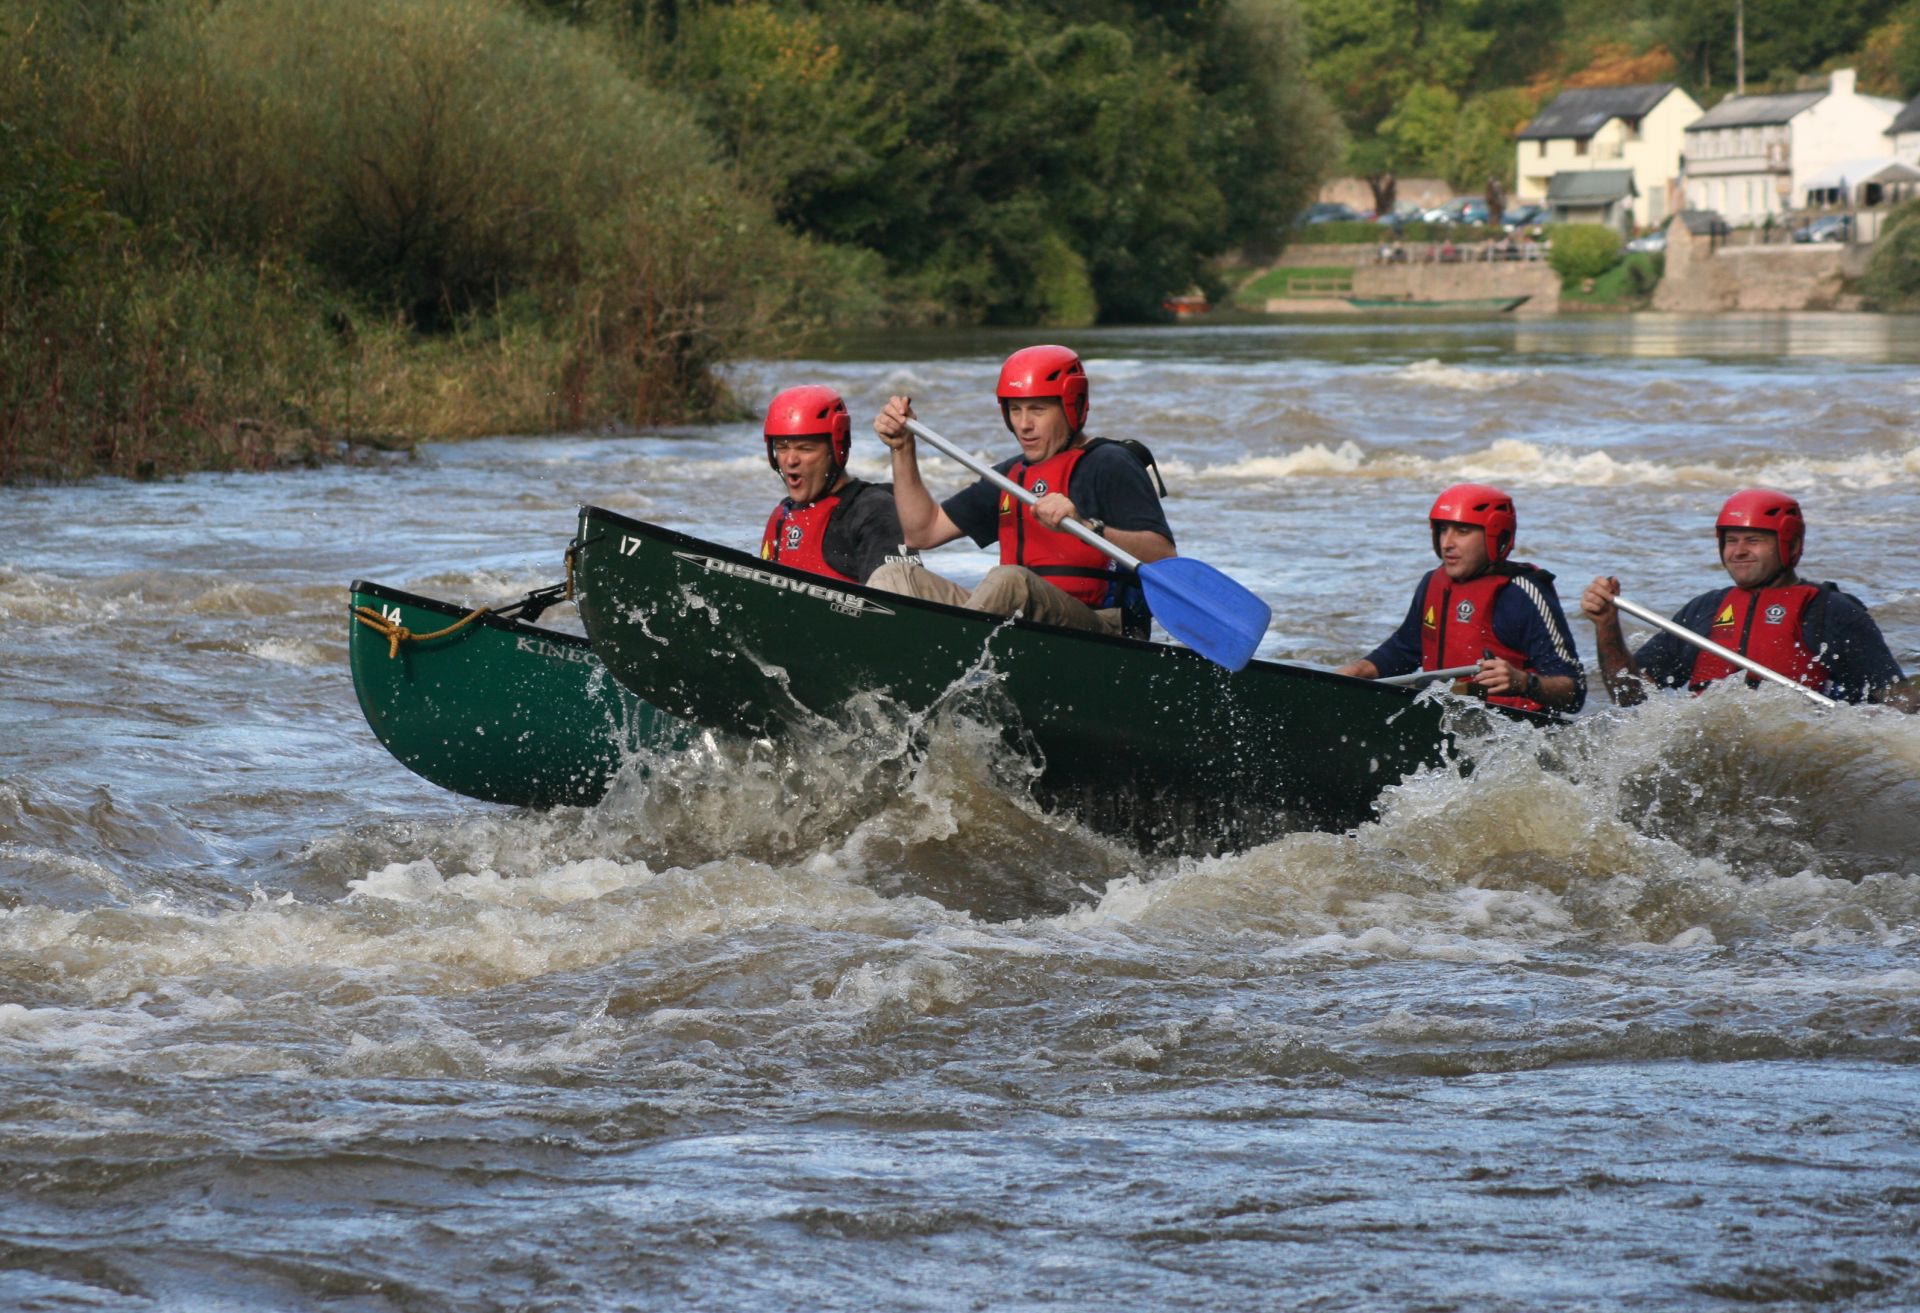 Rafted canoe having fun in the rapids at Symonds Yat